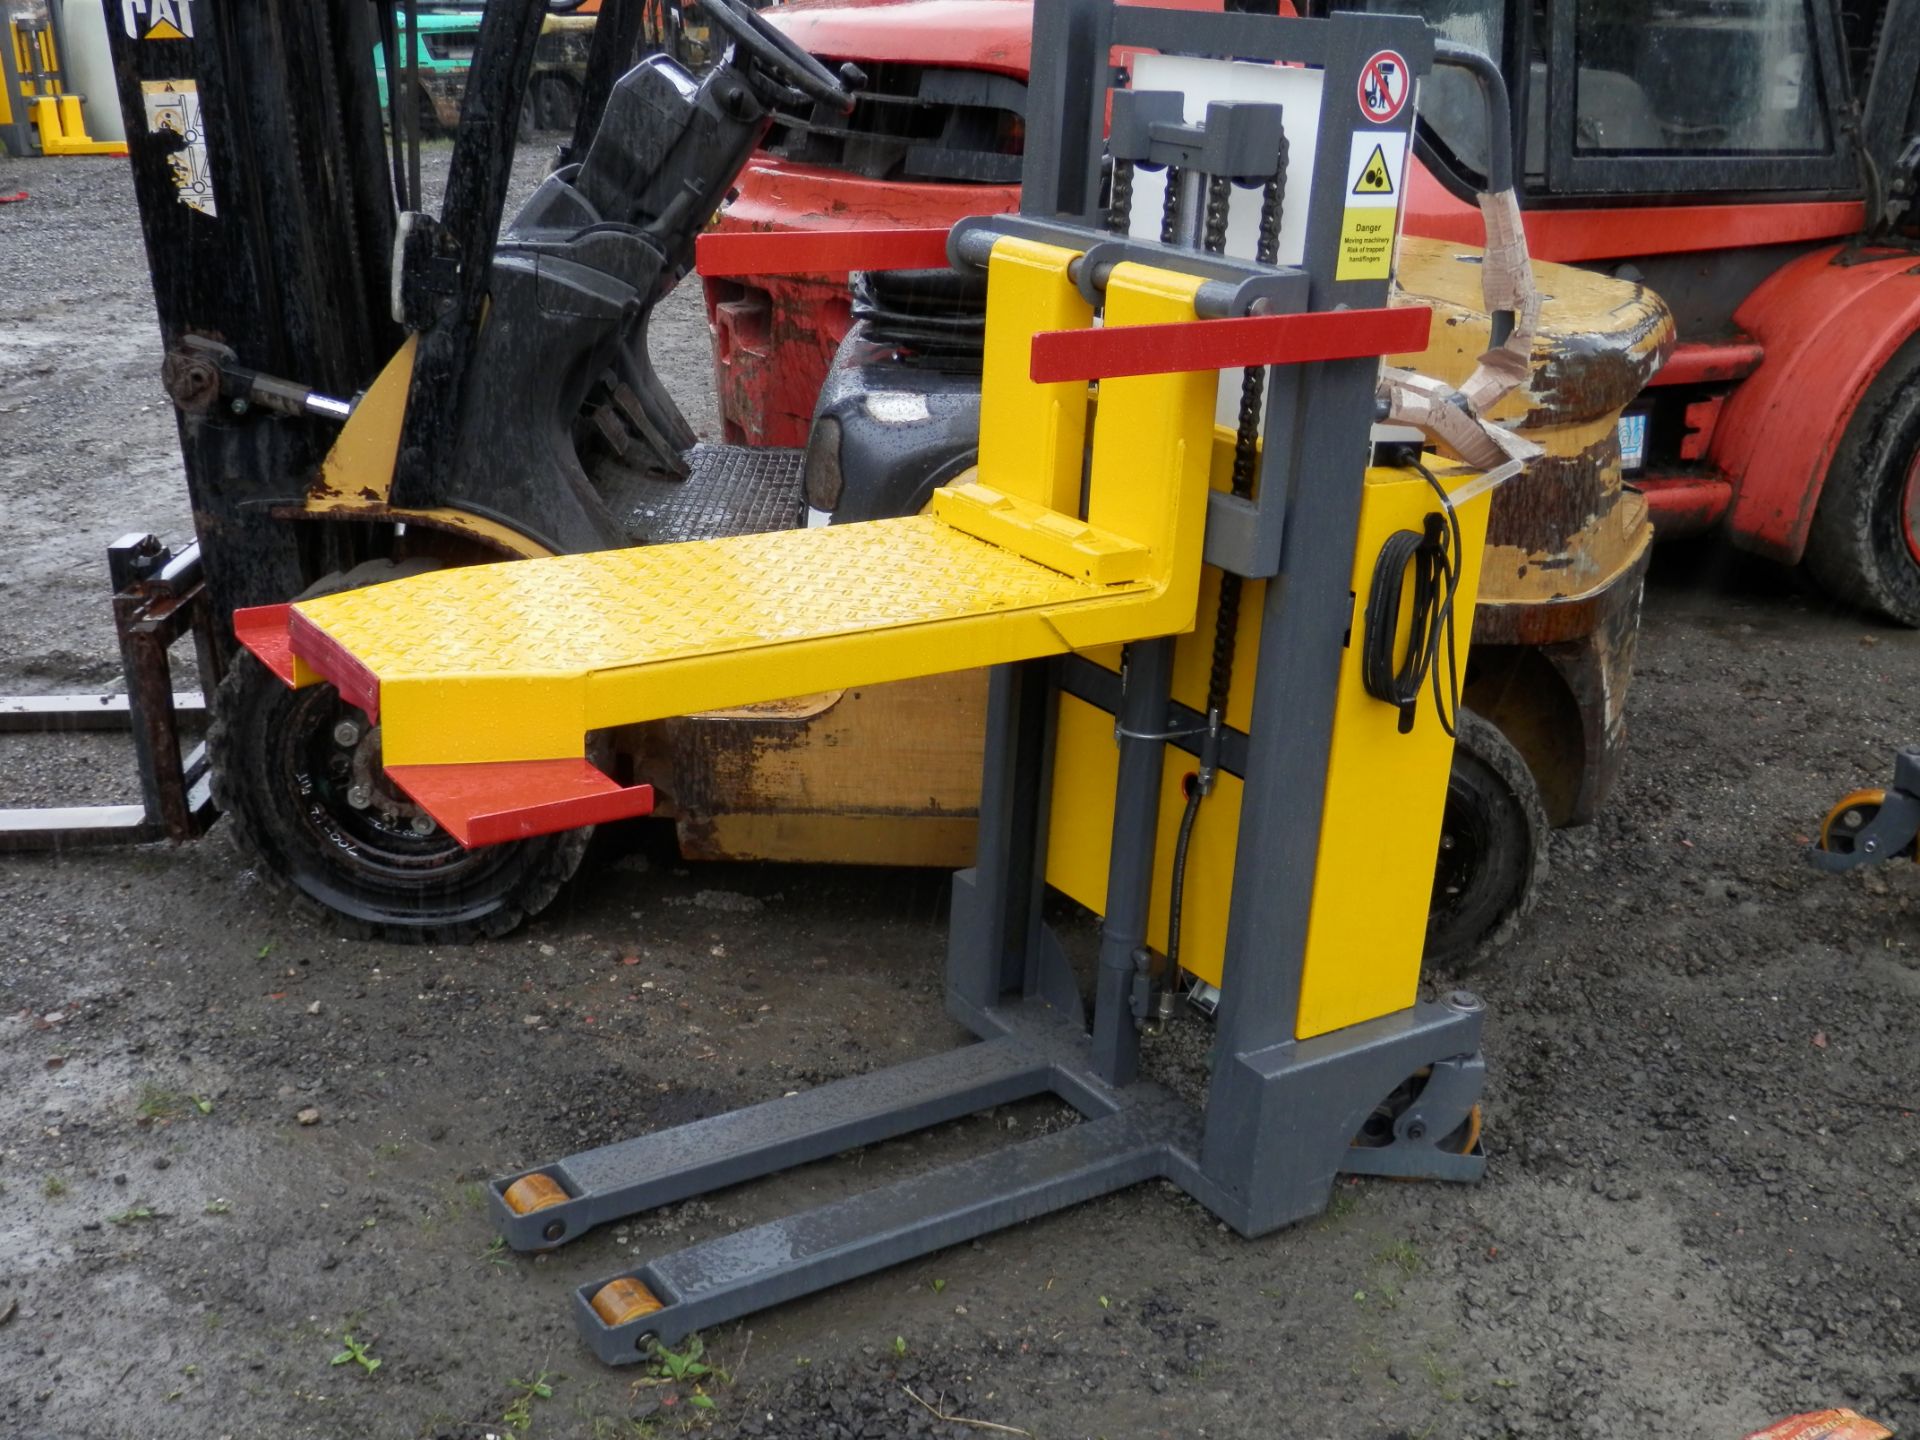 NEW WARRIOR 12V ELECTRIC PALLET TRUCK, 5 AVAILABLE. 250KG LIFT CAPACITY, 1000MM.